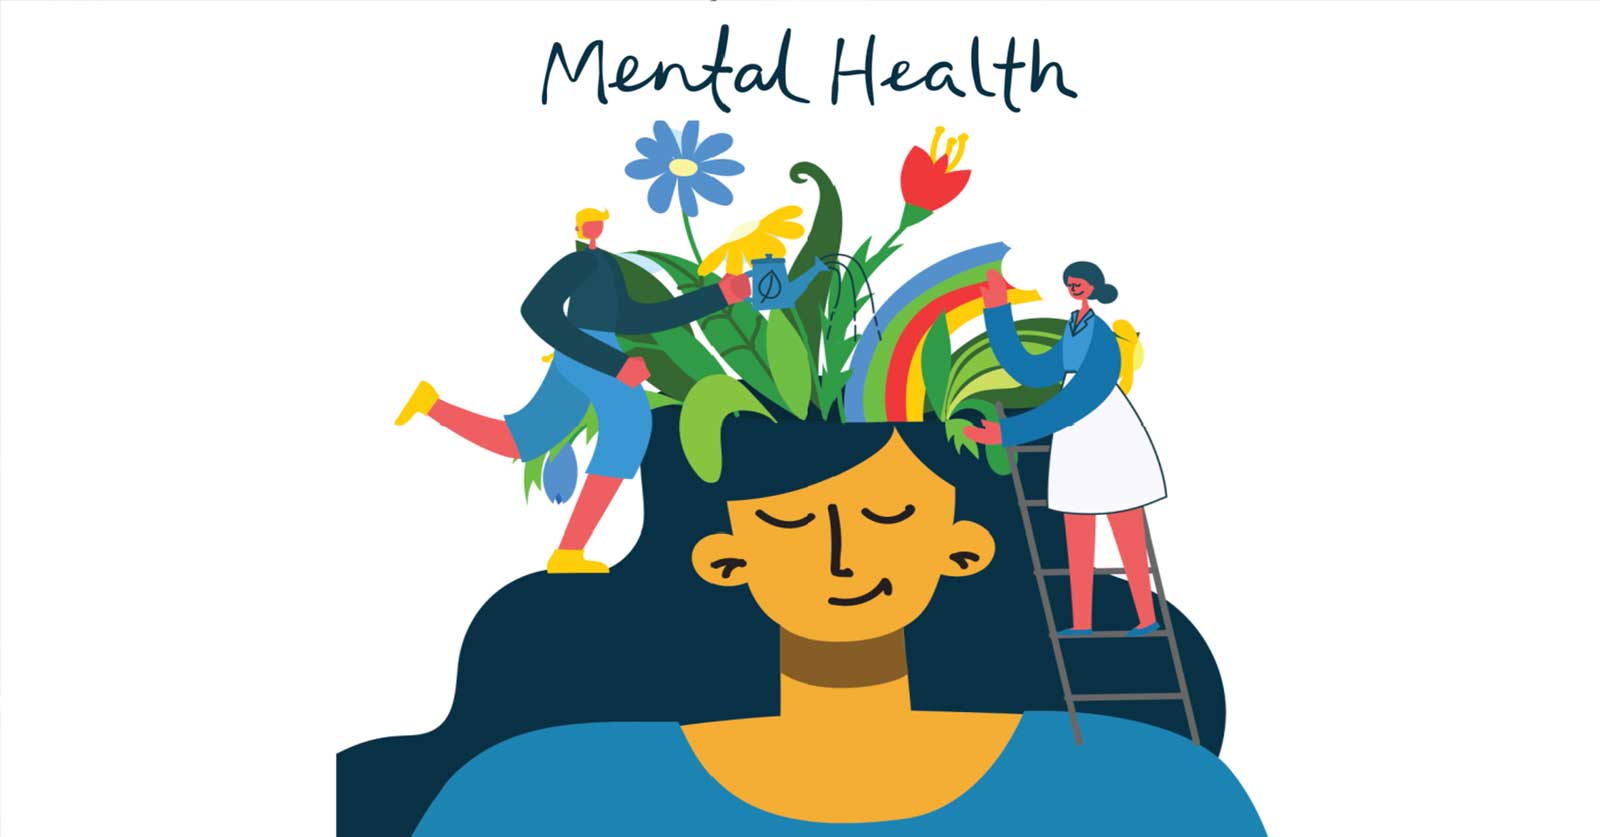 HR Insights: 5 Ways HR Can Support Employees’ Mental Health